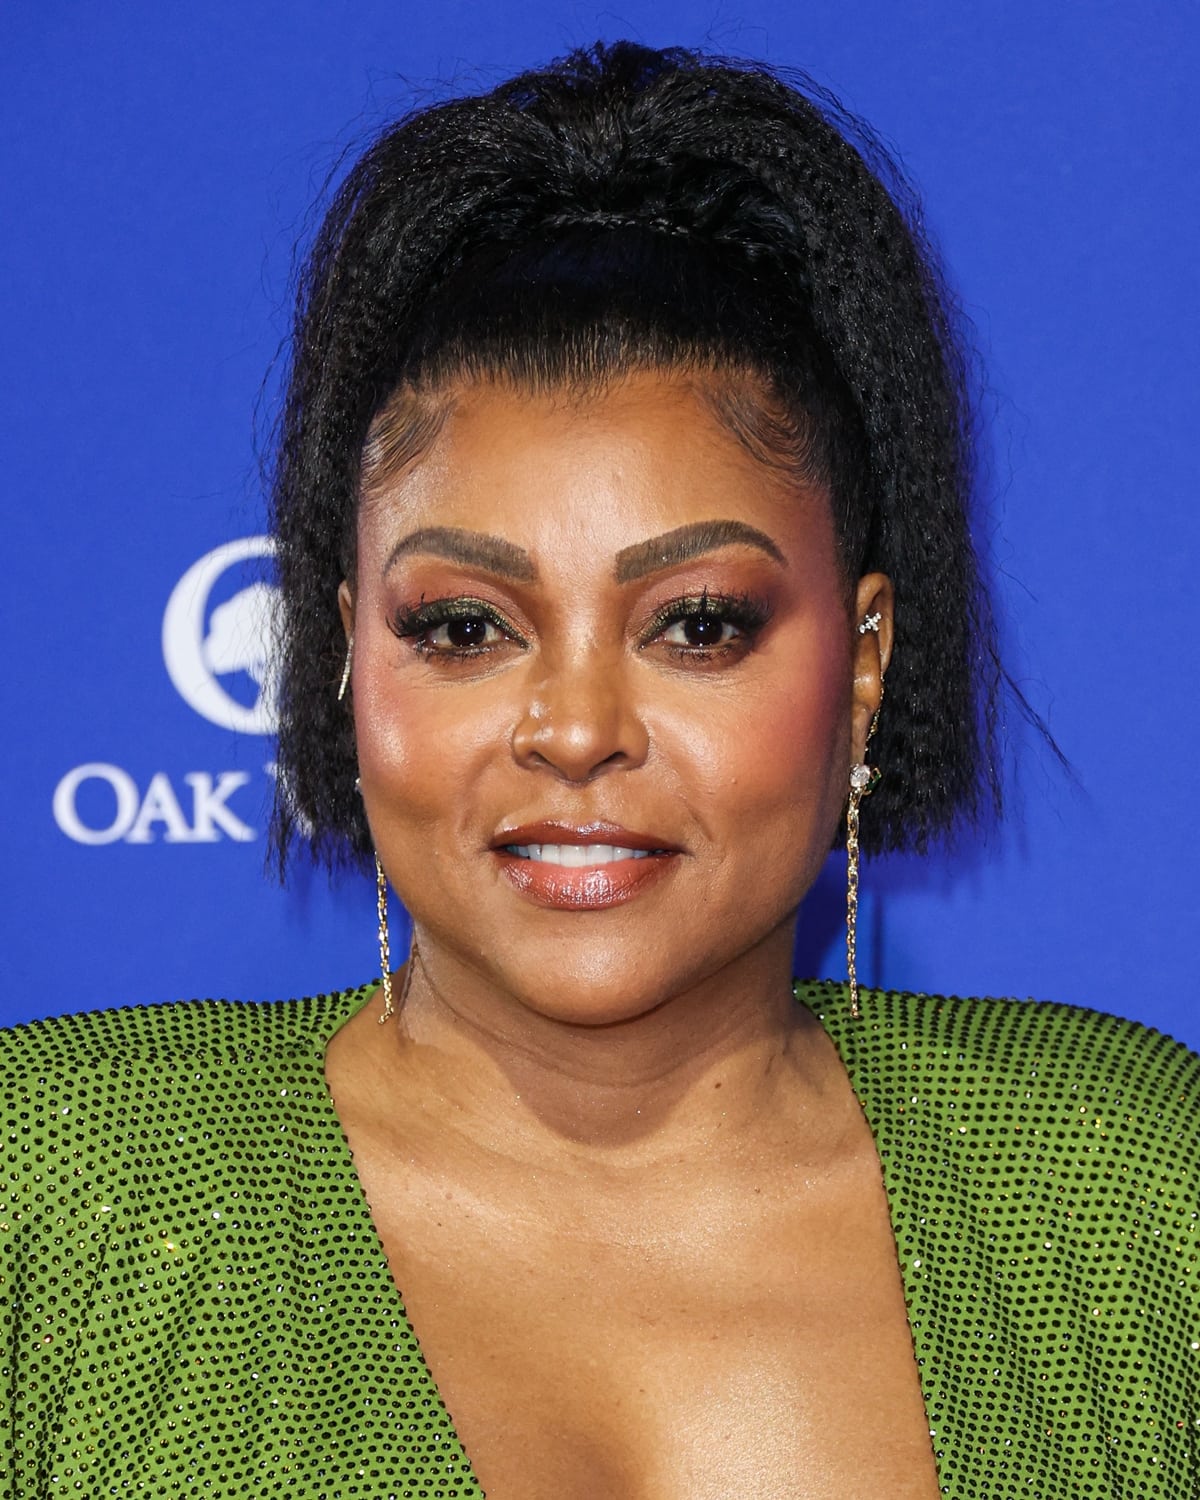 Powerful Words: Taraji P. Henson opens up about salary inequality in Hollywood, making a strong impact at the awards show